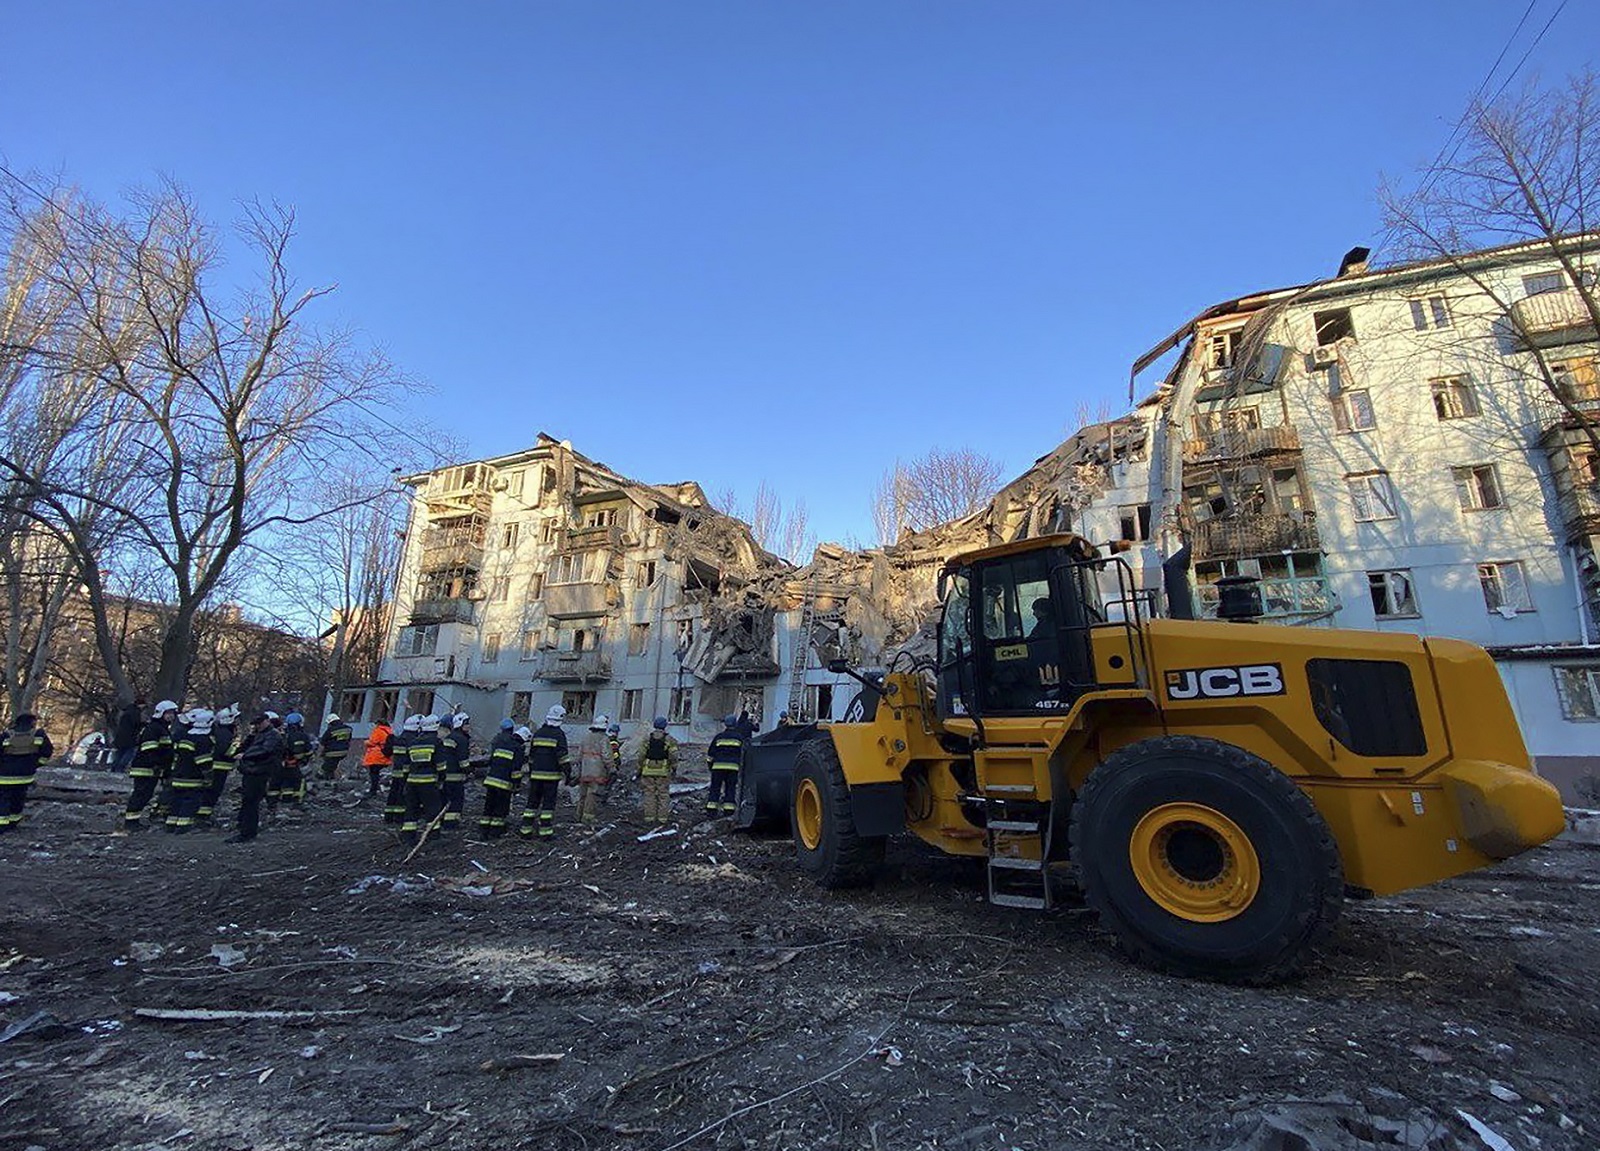 epa10498406 A handout photo made available by the State Emergency Service (SES) shows emergency services at the site of a damaged residential building in Zaporizhzhia, Ukraine, 02 March 2023. At least two people died and 11 others were injured after a rocket hit a five-story building in Zaporizhzhia, the State Emergency Service (SES) of Ukraine report. Russian troops entered Ukraine on 24 February 2022 starting a conflict that has provoked destruction and a humanitarian crisis.  EPA/STATE EMERGENCY SERVICE HANDOUT HANDOUT HANDOUT EDITORIAL USE ONLY/NO SALES